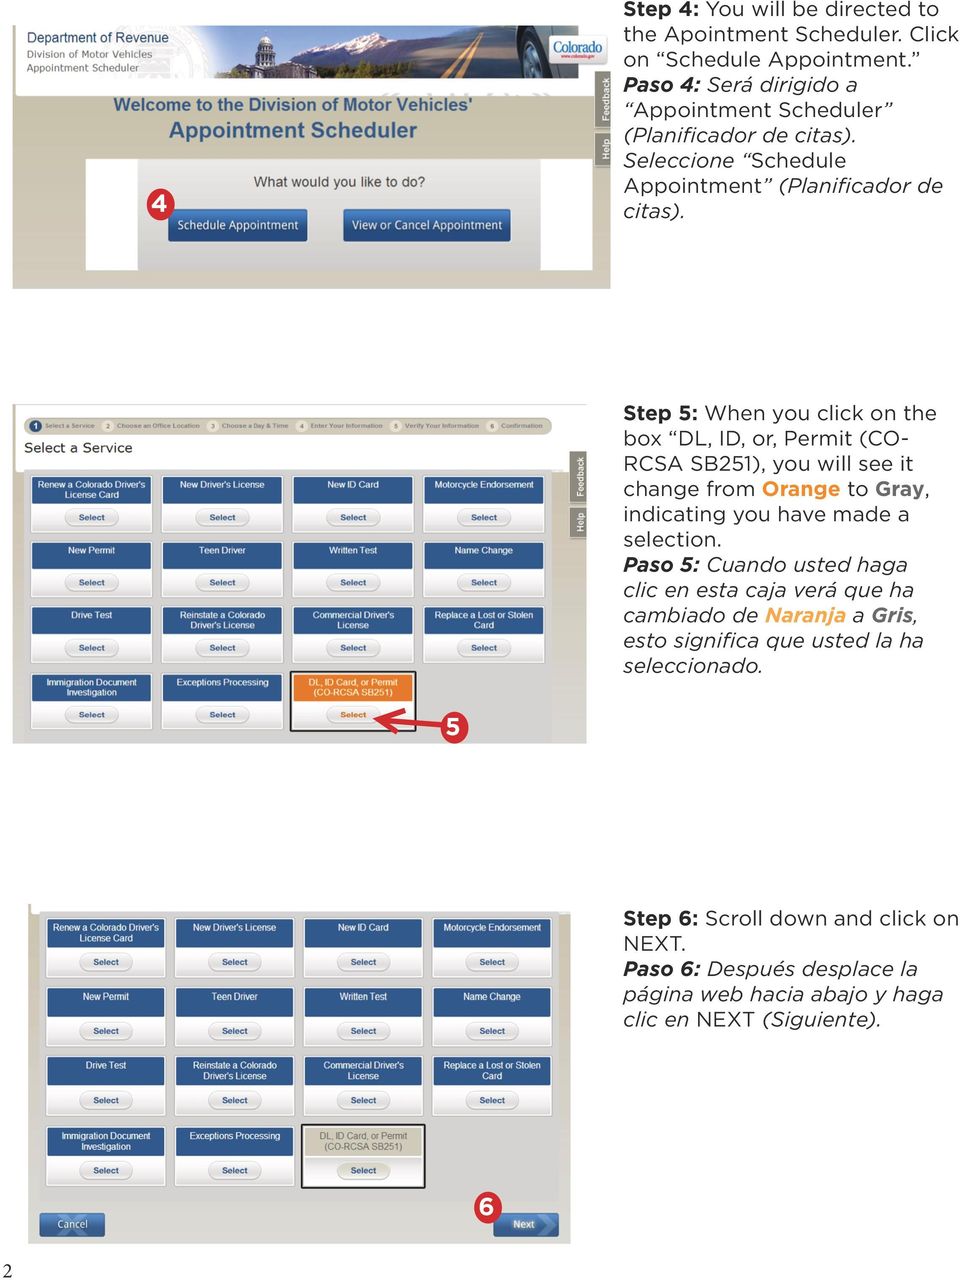 Step 5: When you click on the box DL, ID, or, Permit (CO- RCSA SB251), you will see it change from Orange to Gray, indicating you have made a selection.